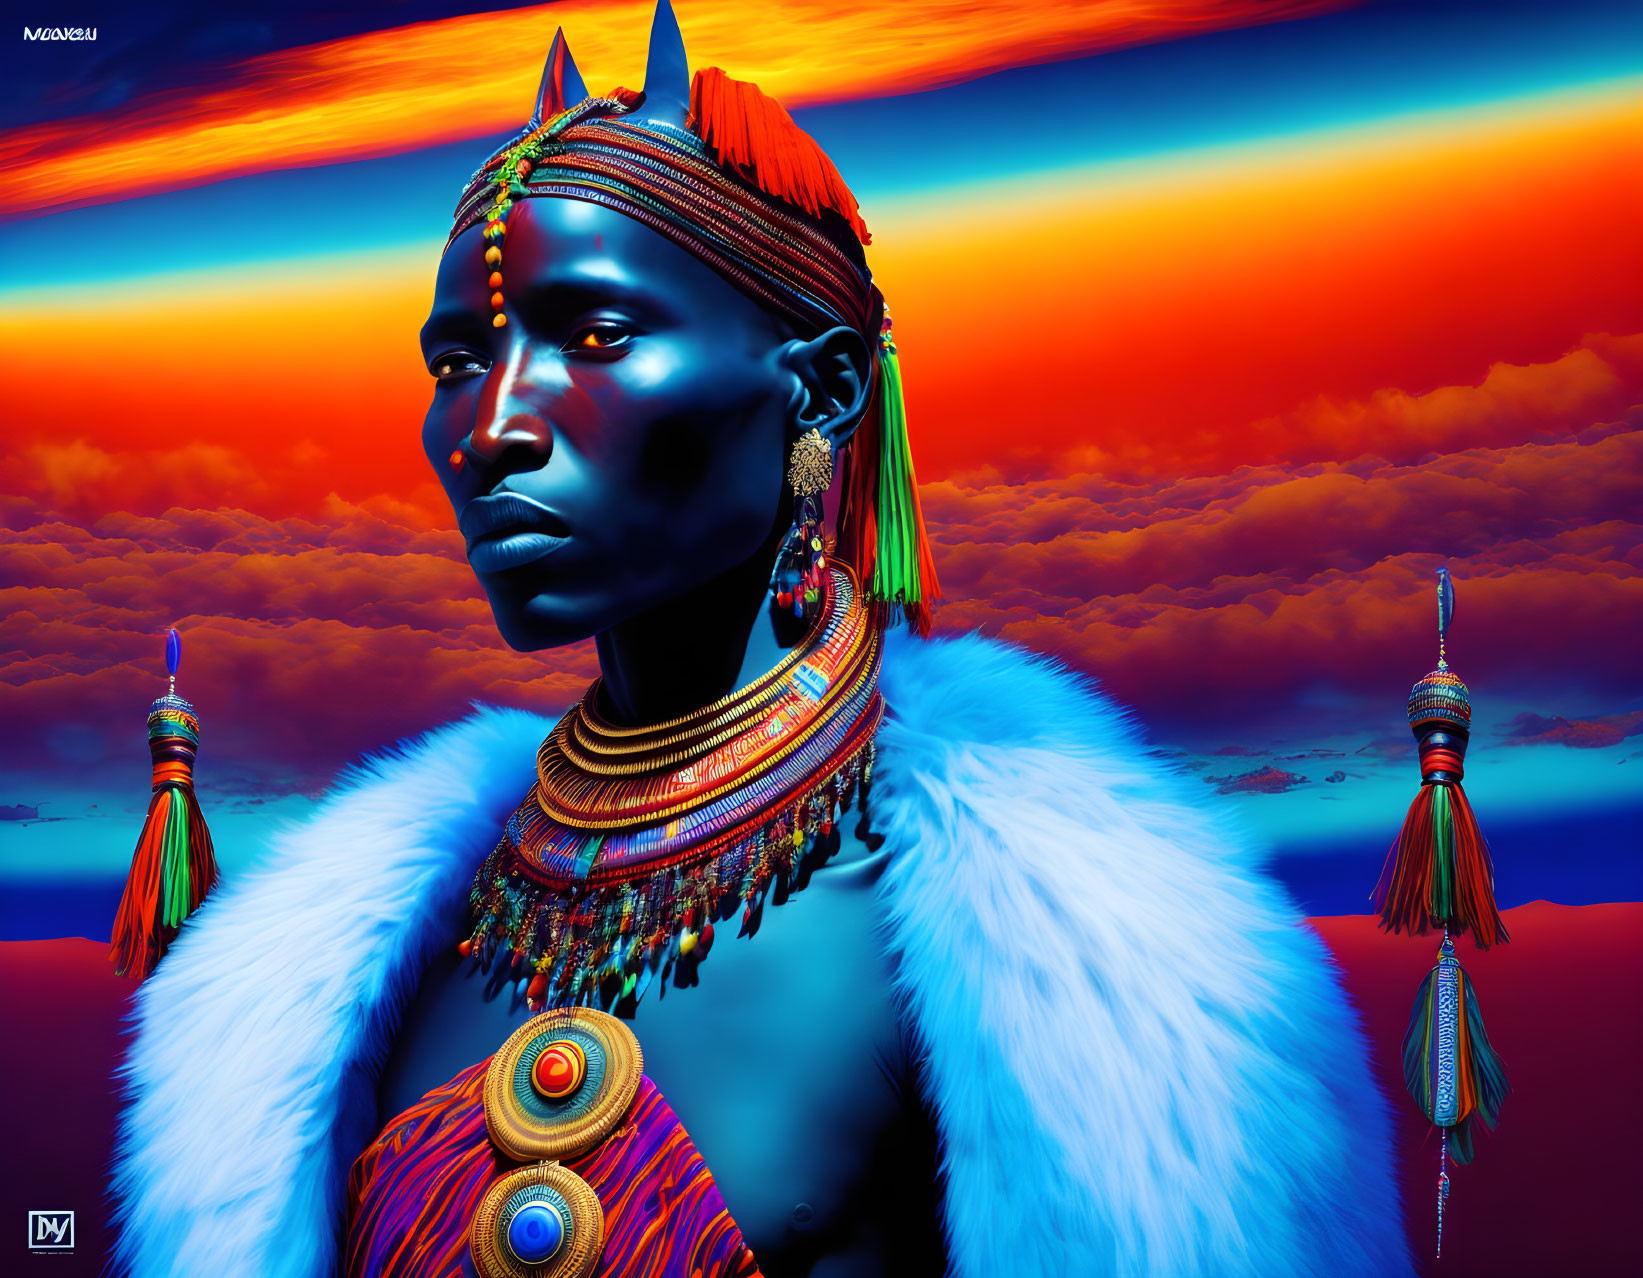 Blue-skinned person with tribal jewelry in front of orange sunset.